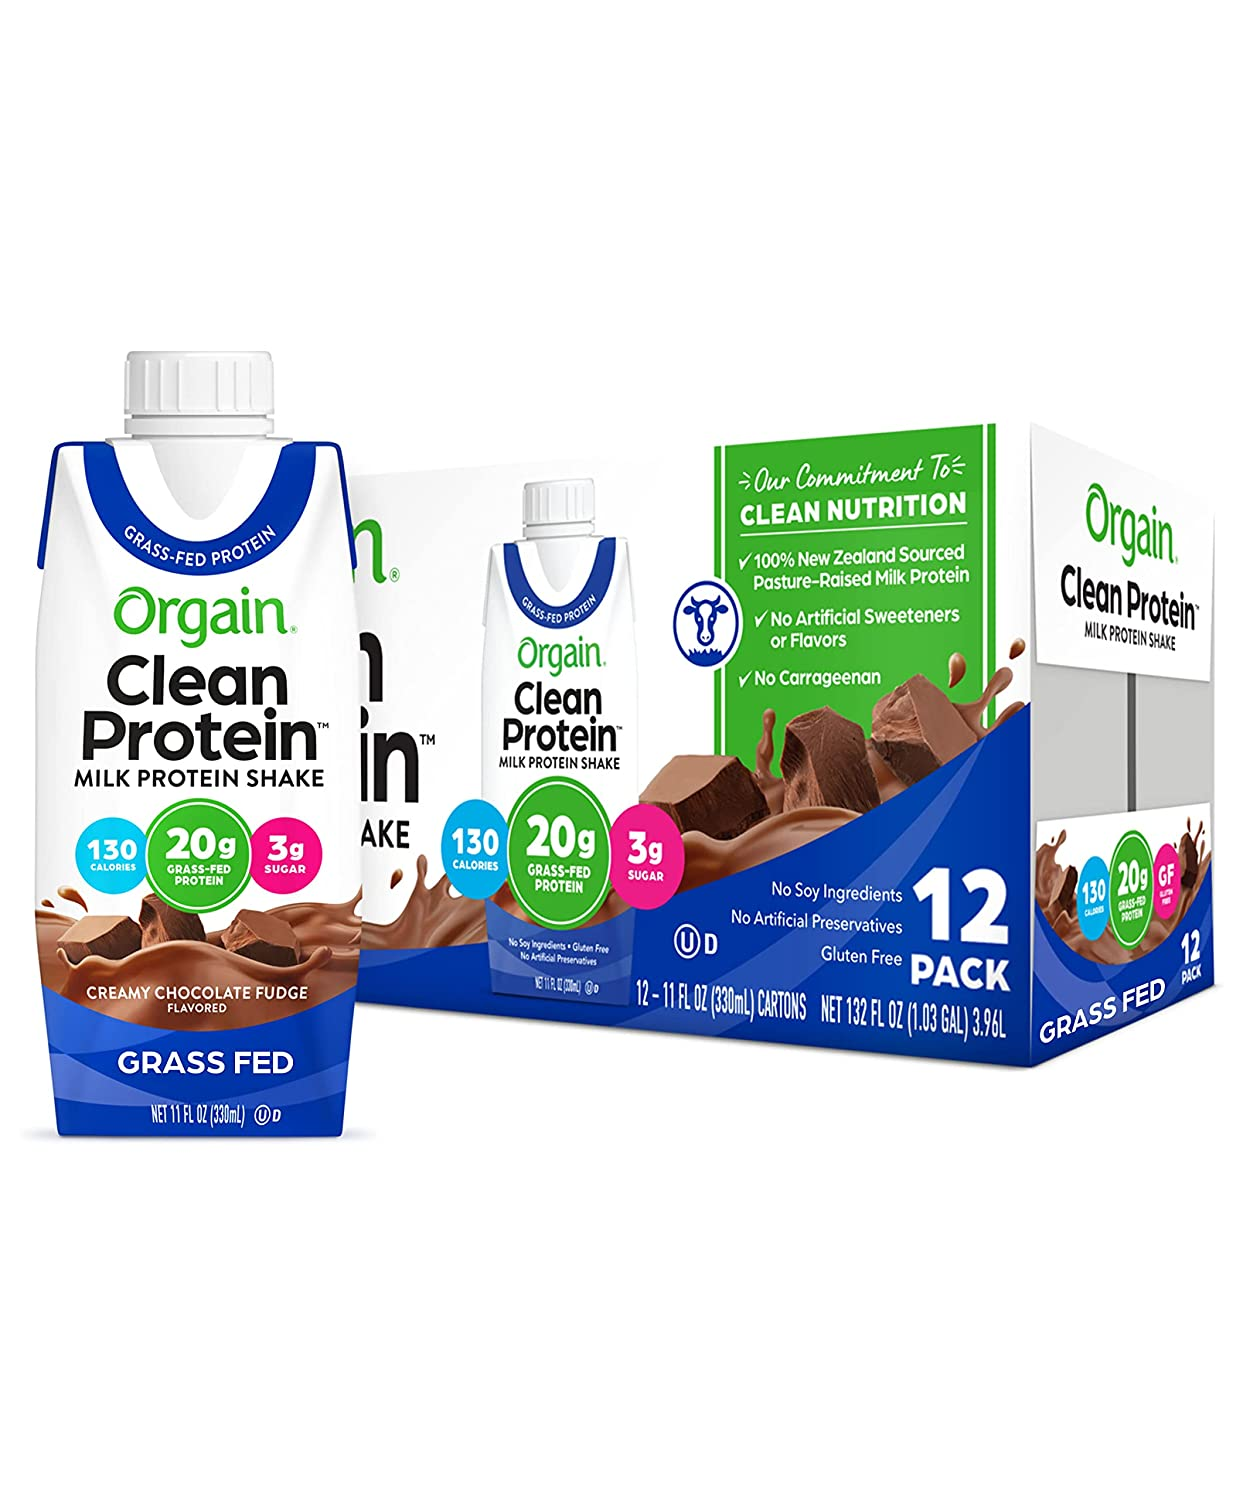 Orgain Grass Fed Clean Protein Shake, Creamy Chocolate Fudge - 20G of Protein, Meal Replacement, Ready to Drink, Gluten Free, Soy Free, Kosher, Packaging May Vary, 11 Fl Oz (Pack of 12)